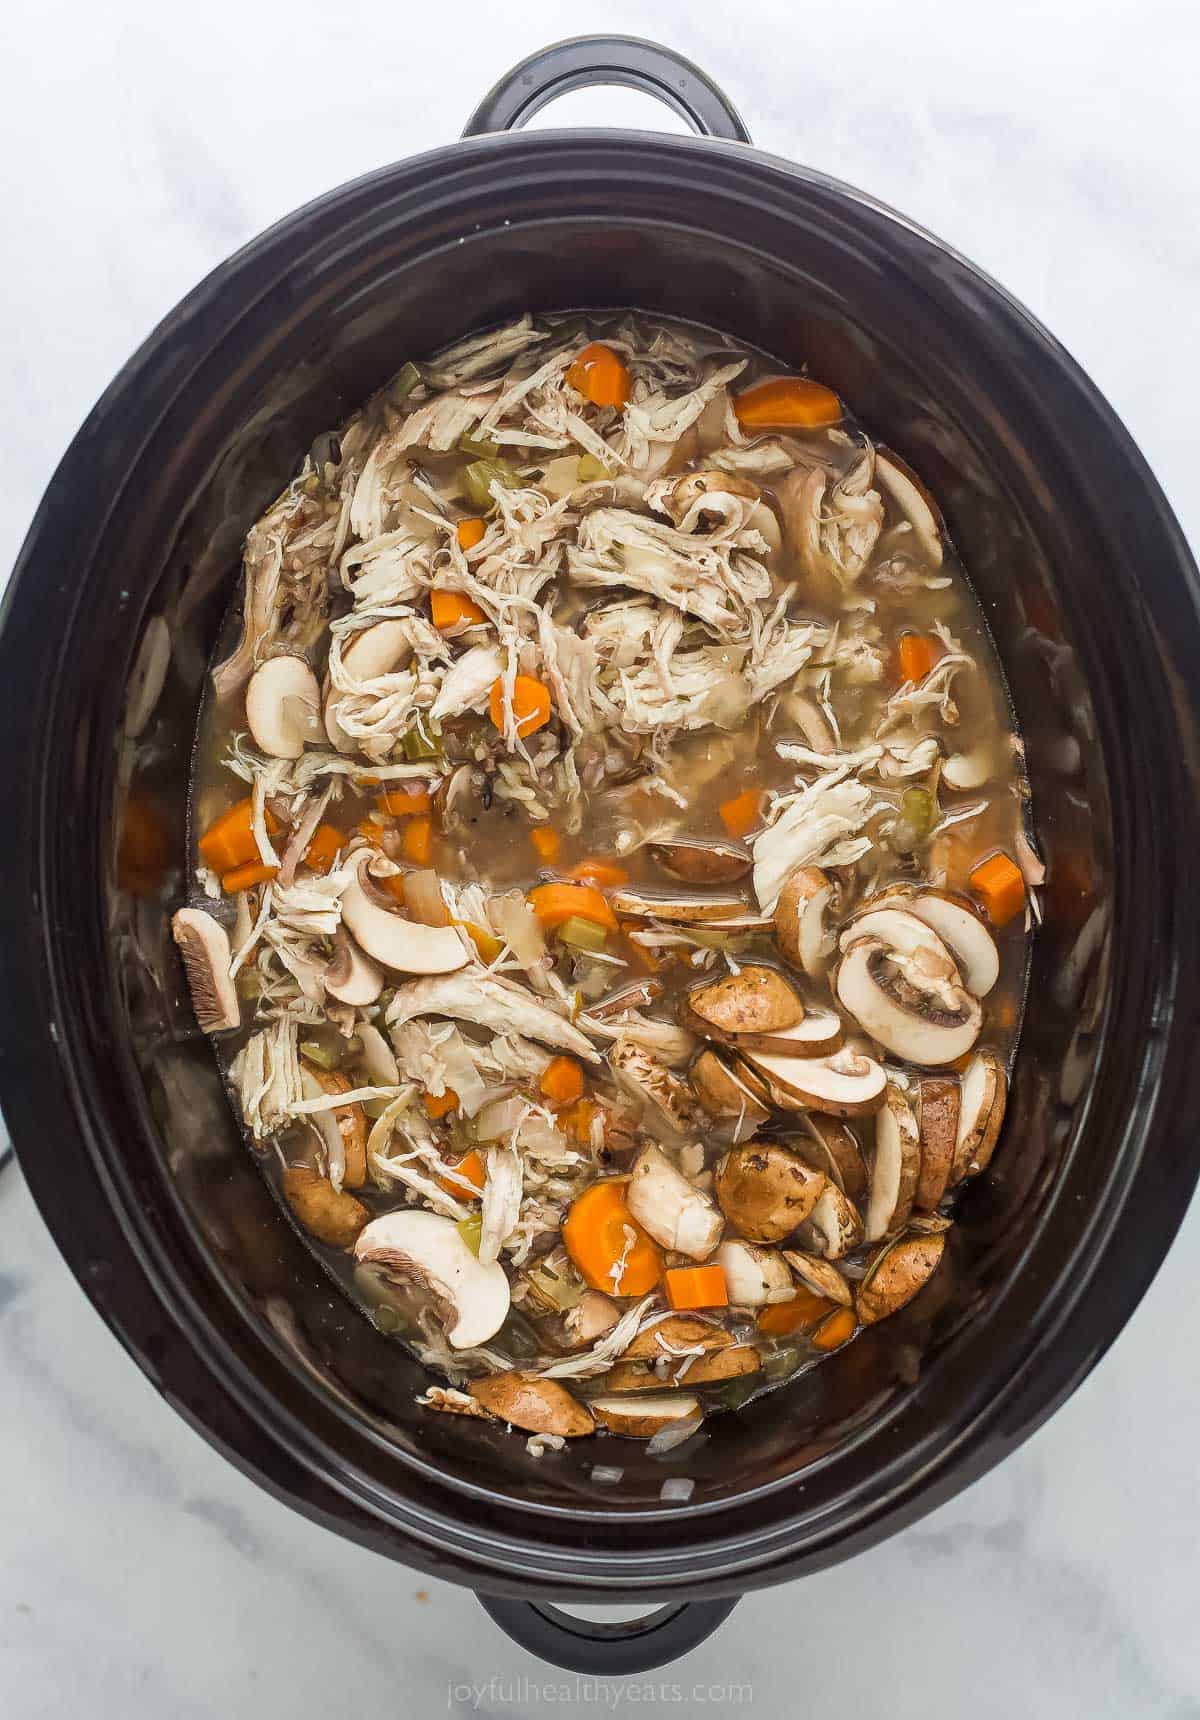 mushrooms and other vegetables in a soup in the crockpot